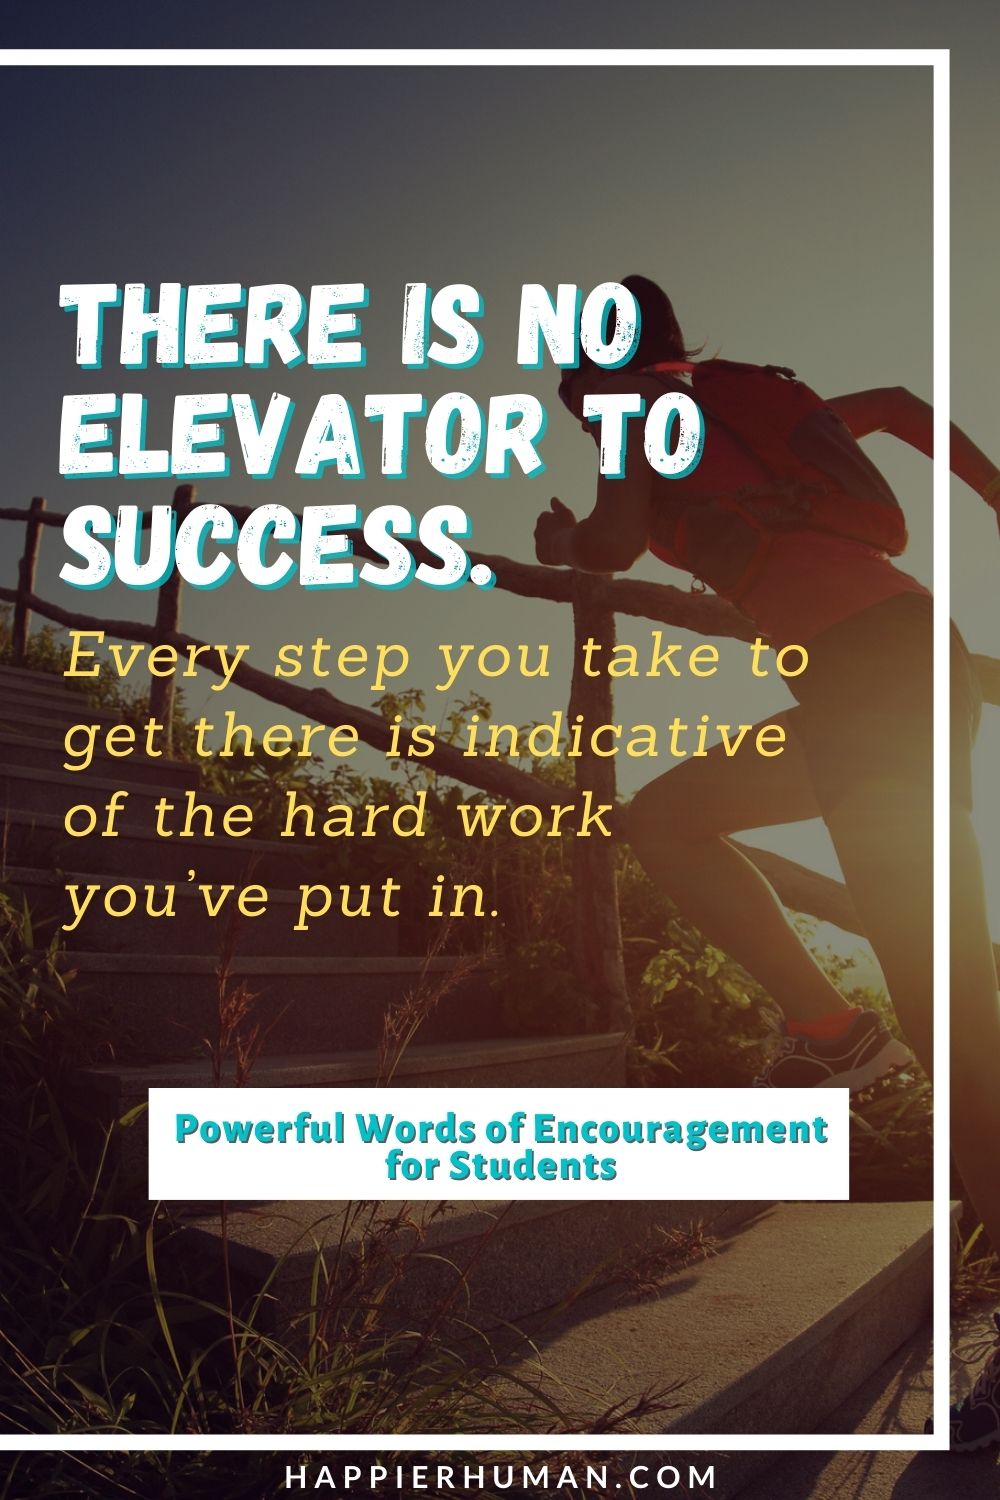 Words of Encouragement for Students - There is no elevator to success. Every step you take to get there is indicative of the hard work you’ve put in. | motivational quotes for students studying | motivational quotes for students success | encouraging notes for students #affirmation #study #students